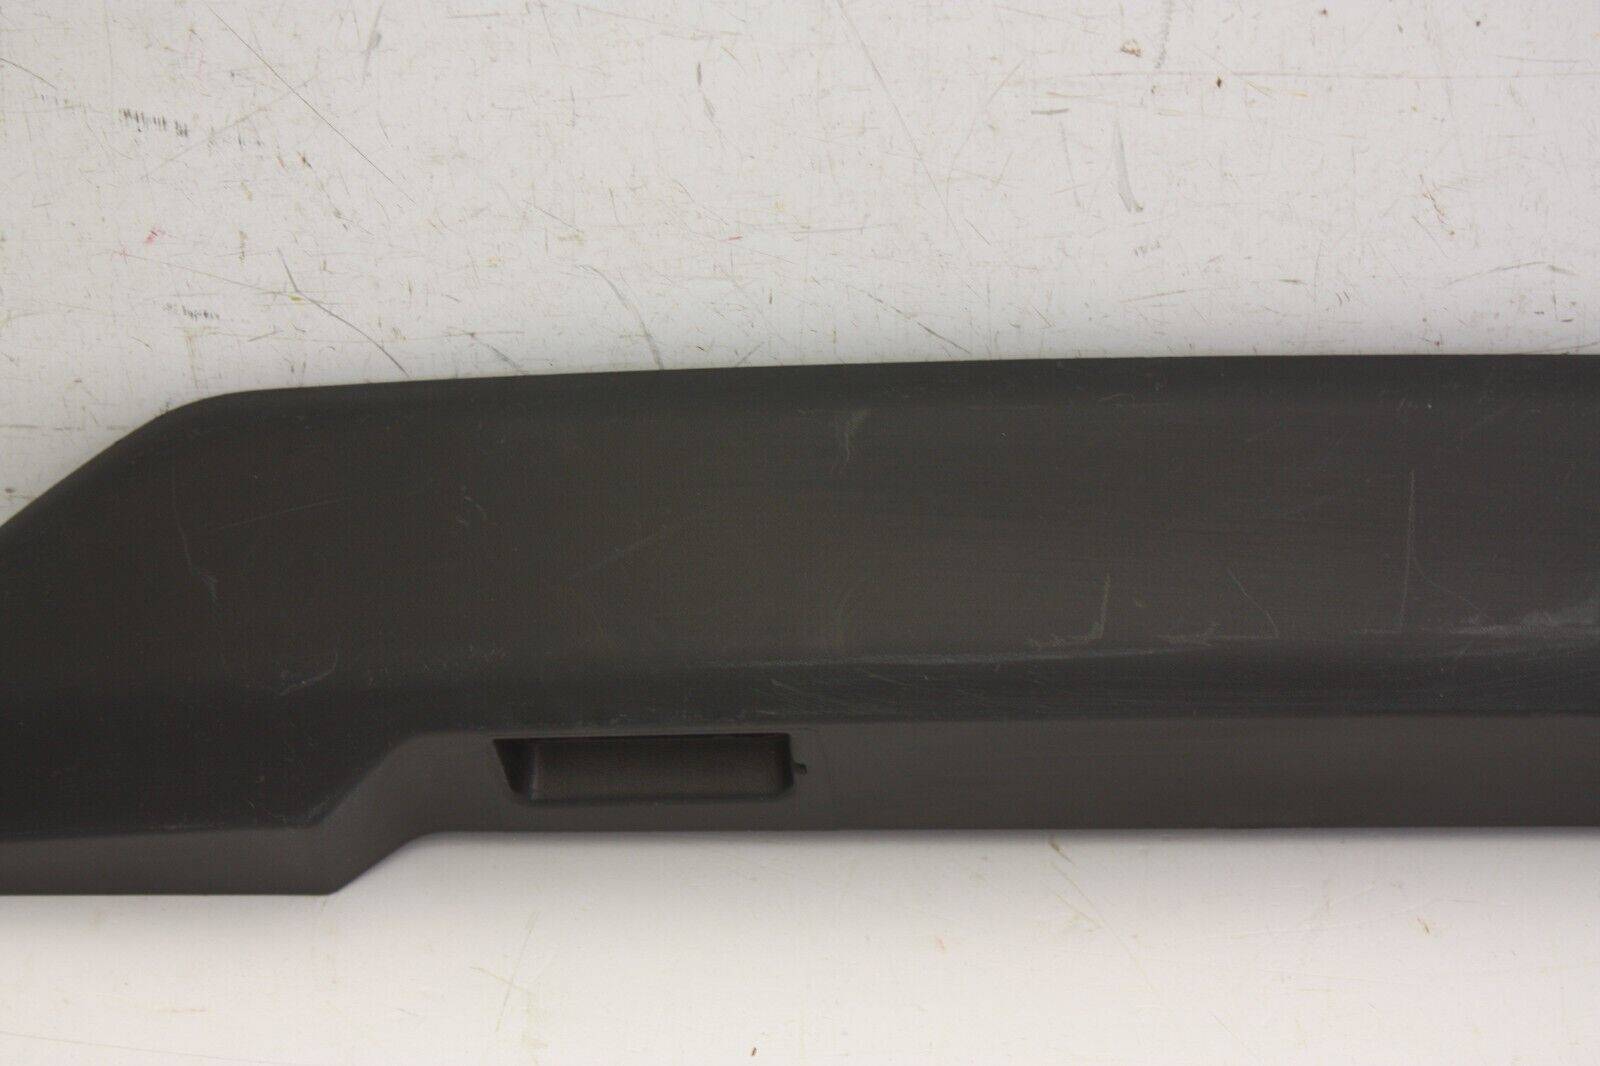 Ford-Transit-Custom-Tailgate-Lid-Cover-Recording-Bar-2018-ON-BK21-13555-AFW-176302846649-4